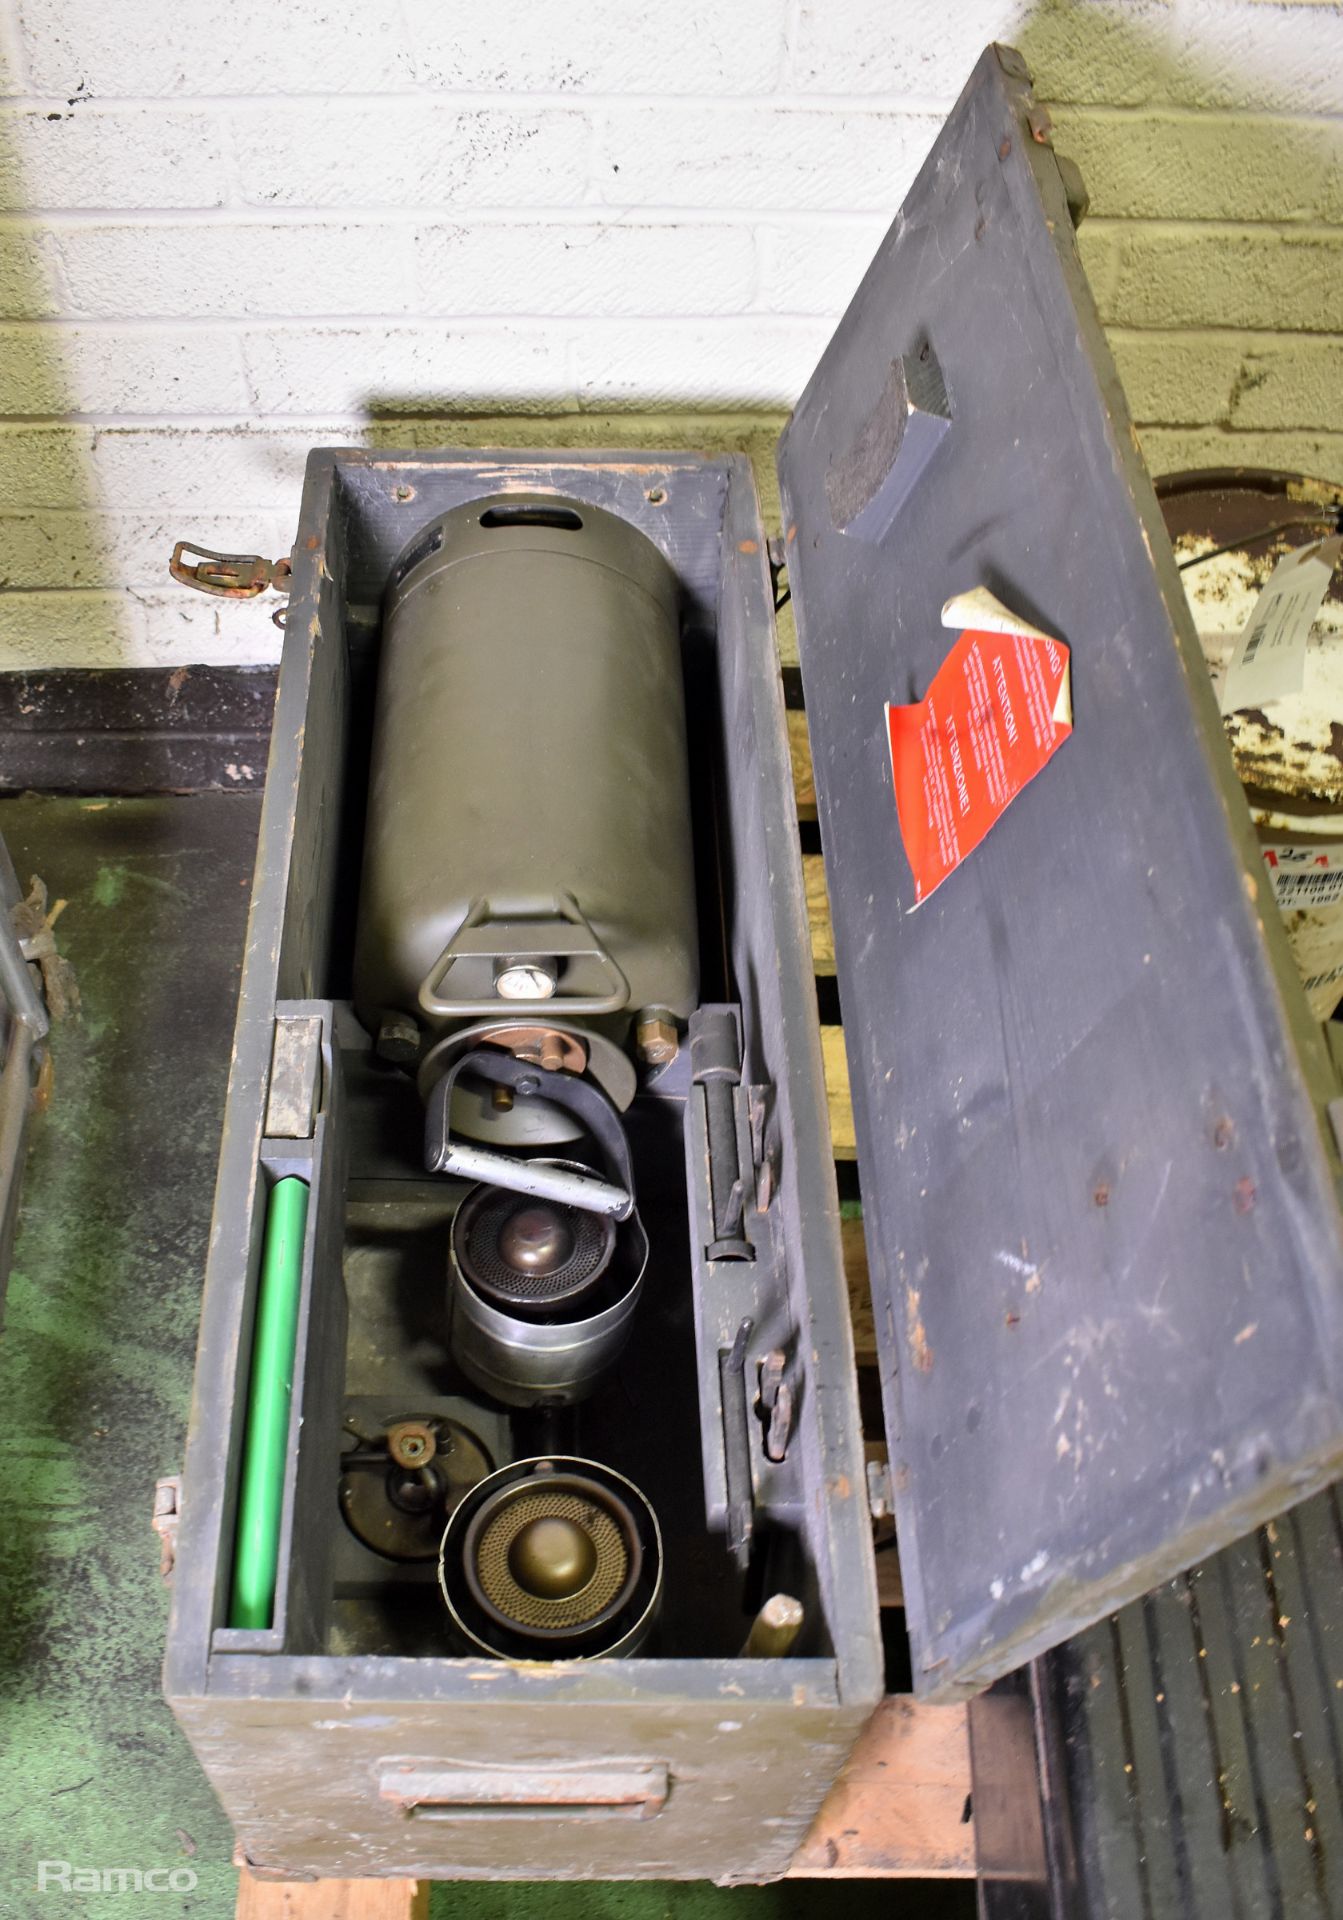 Swiss Army ex-military double burner stove, portable, in crate with accessories - Image 2 of 4